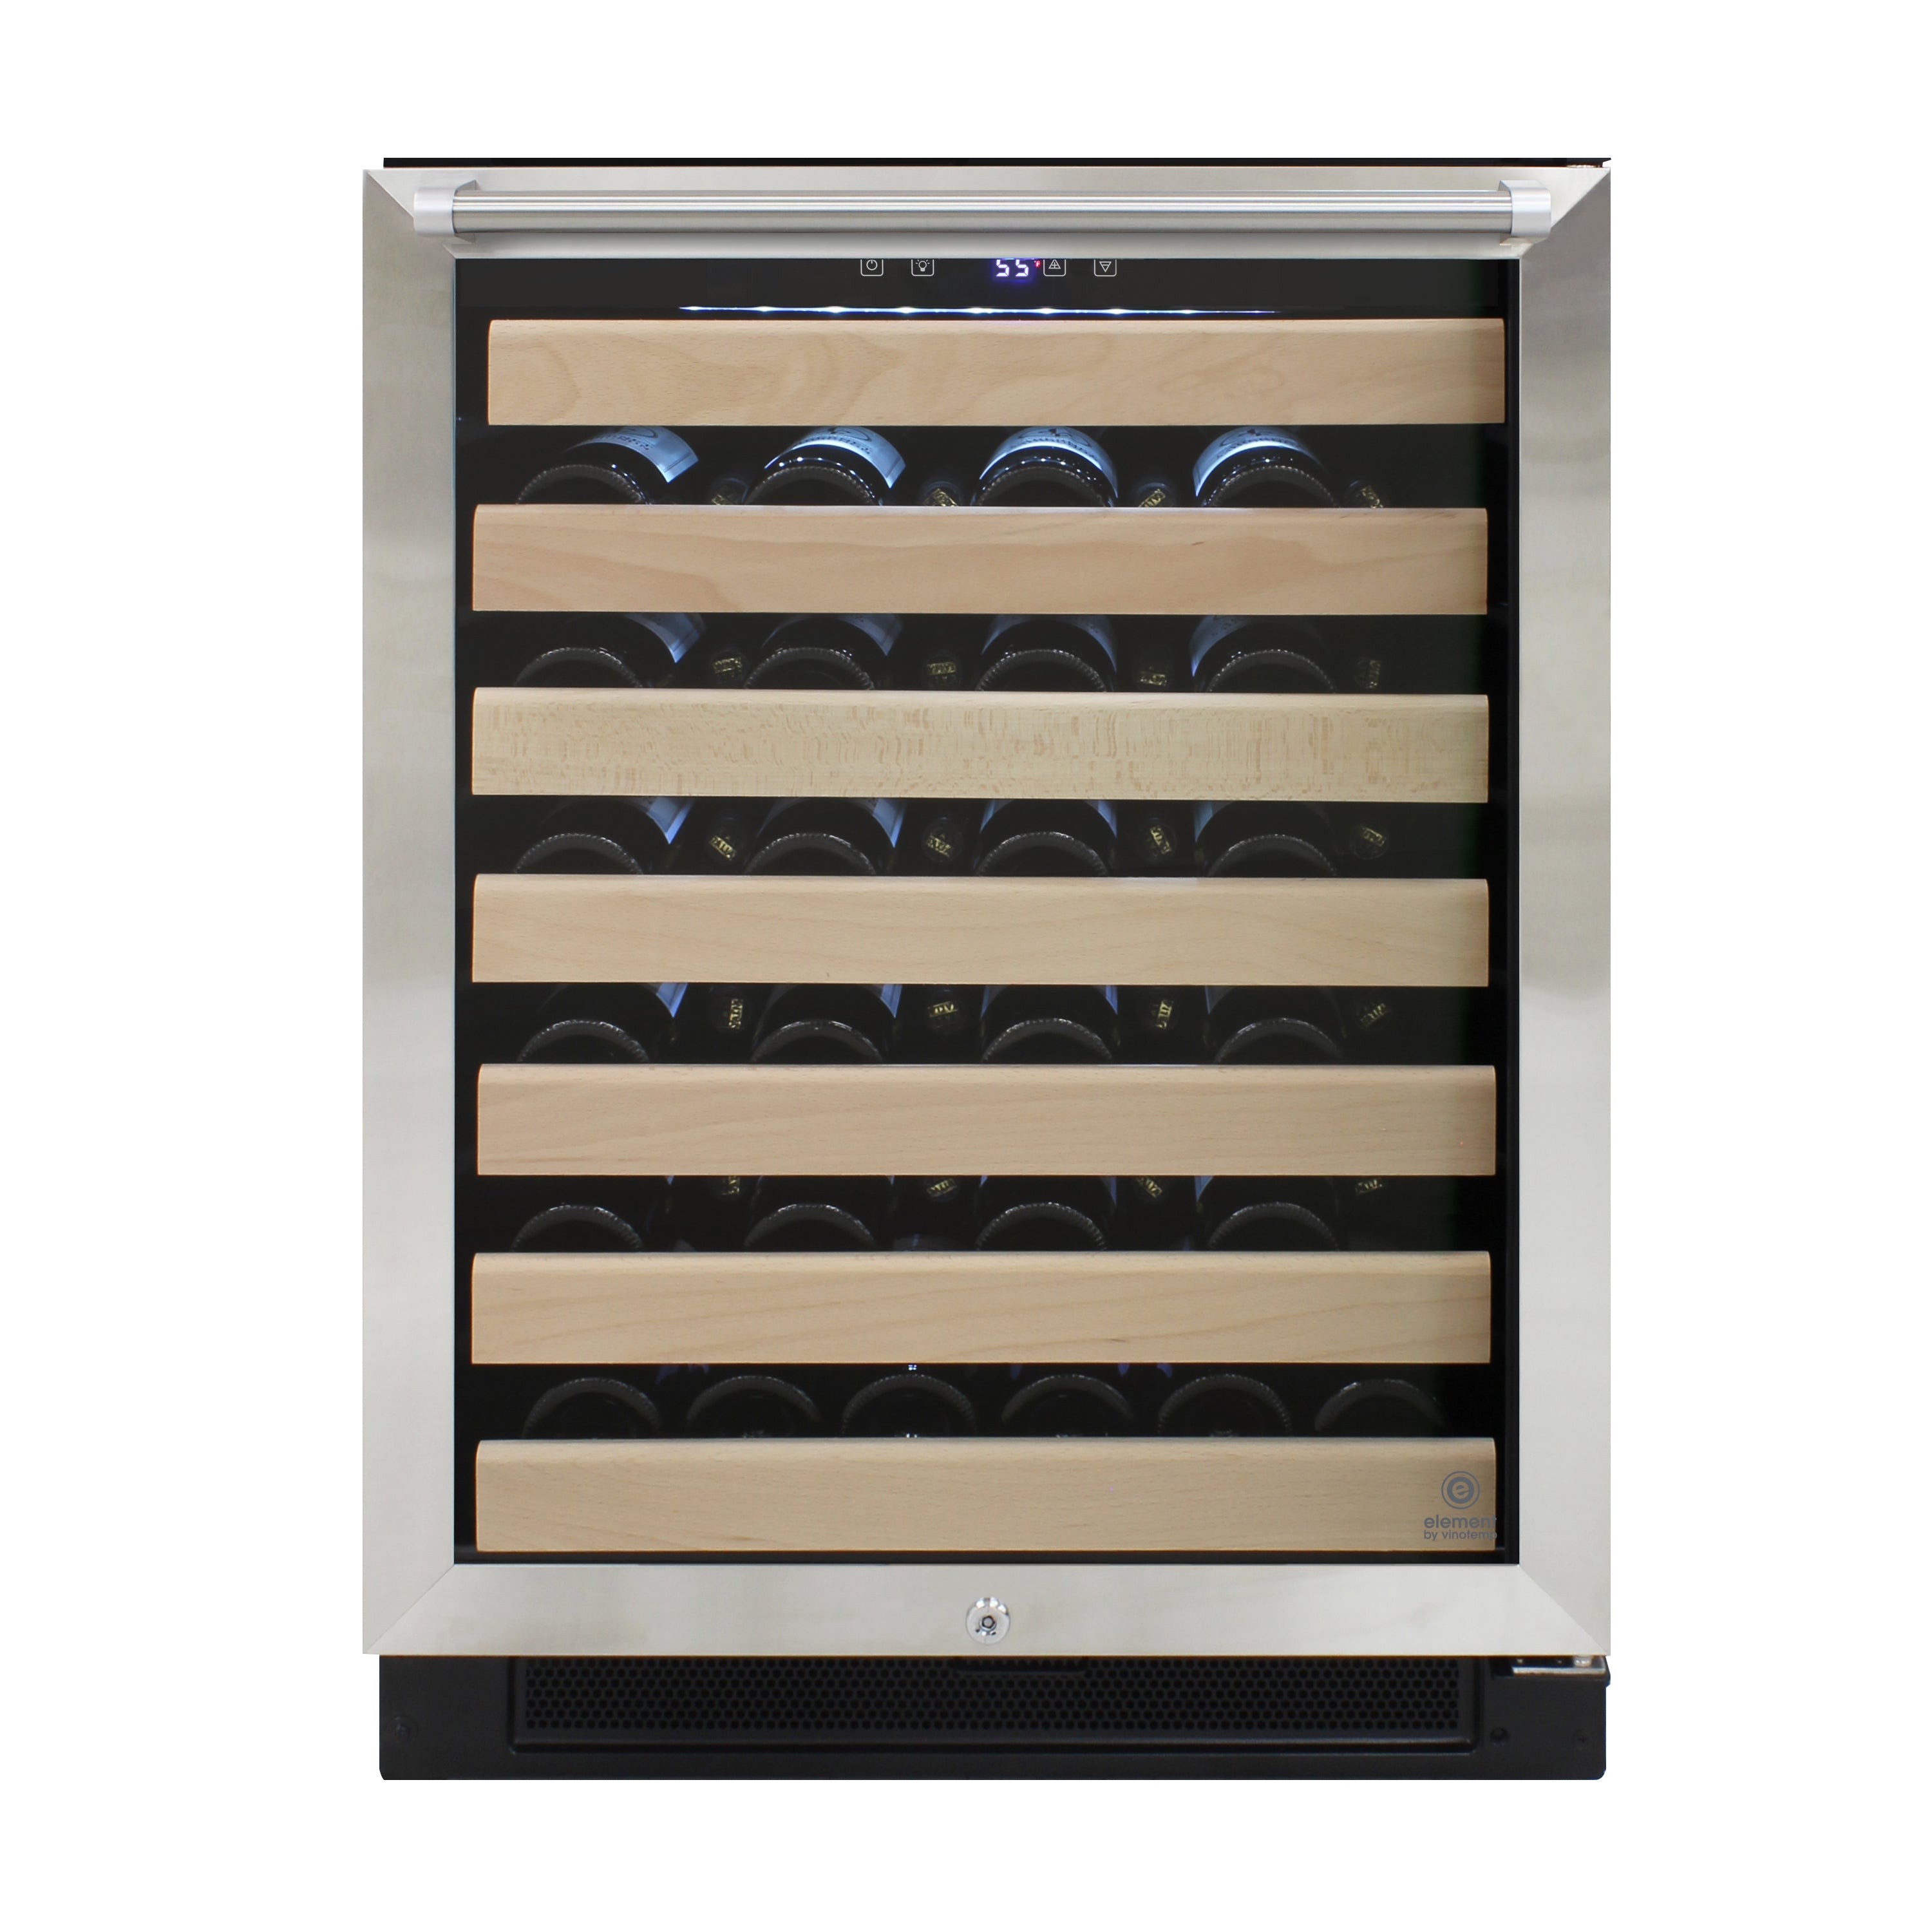 Vinotemp - EL-54SDTH, Vinotemp Connoisseur Series Single-Zone Wine Cooler with Top Pole Handle, 54 Bottle Capacity, in Stainless Steel